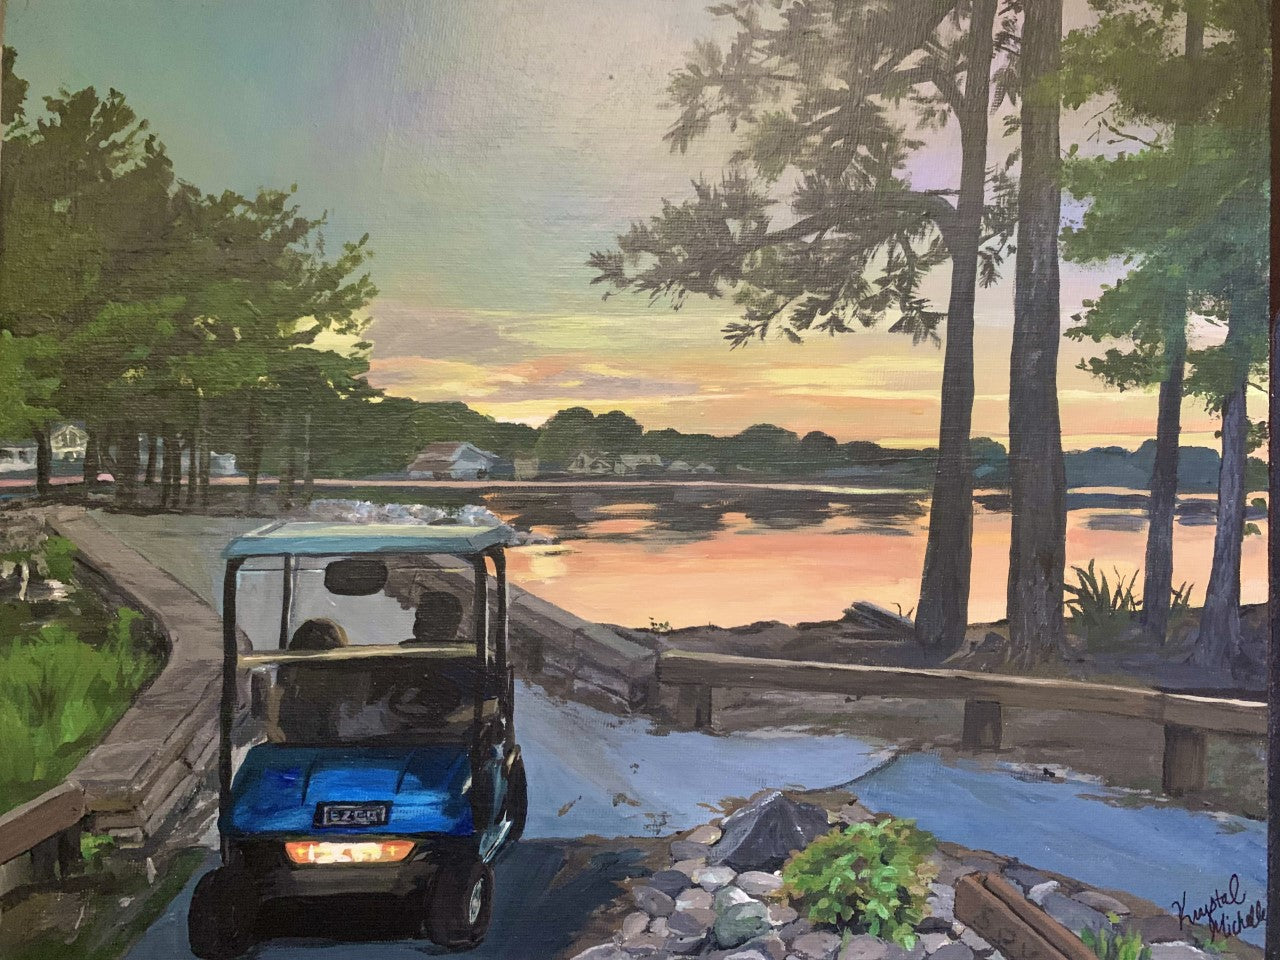 Peachtree City Georgia lake painting • Spyglass Island• Lake Peachtree original painting. 11x14 Canvas panel • Prints also available